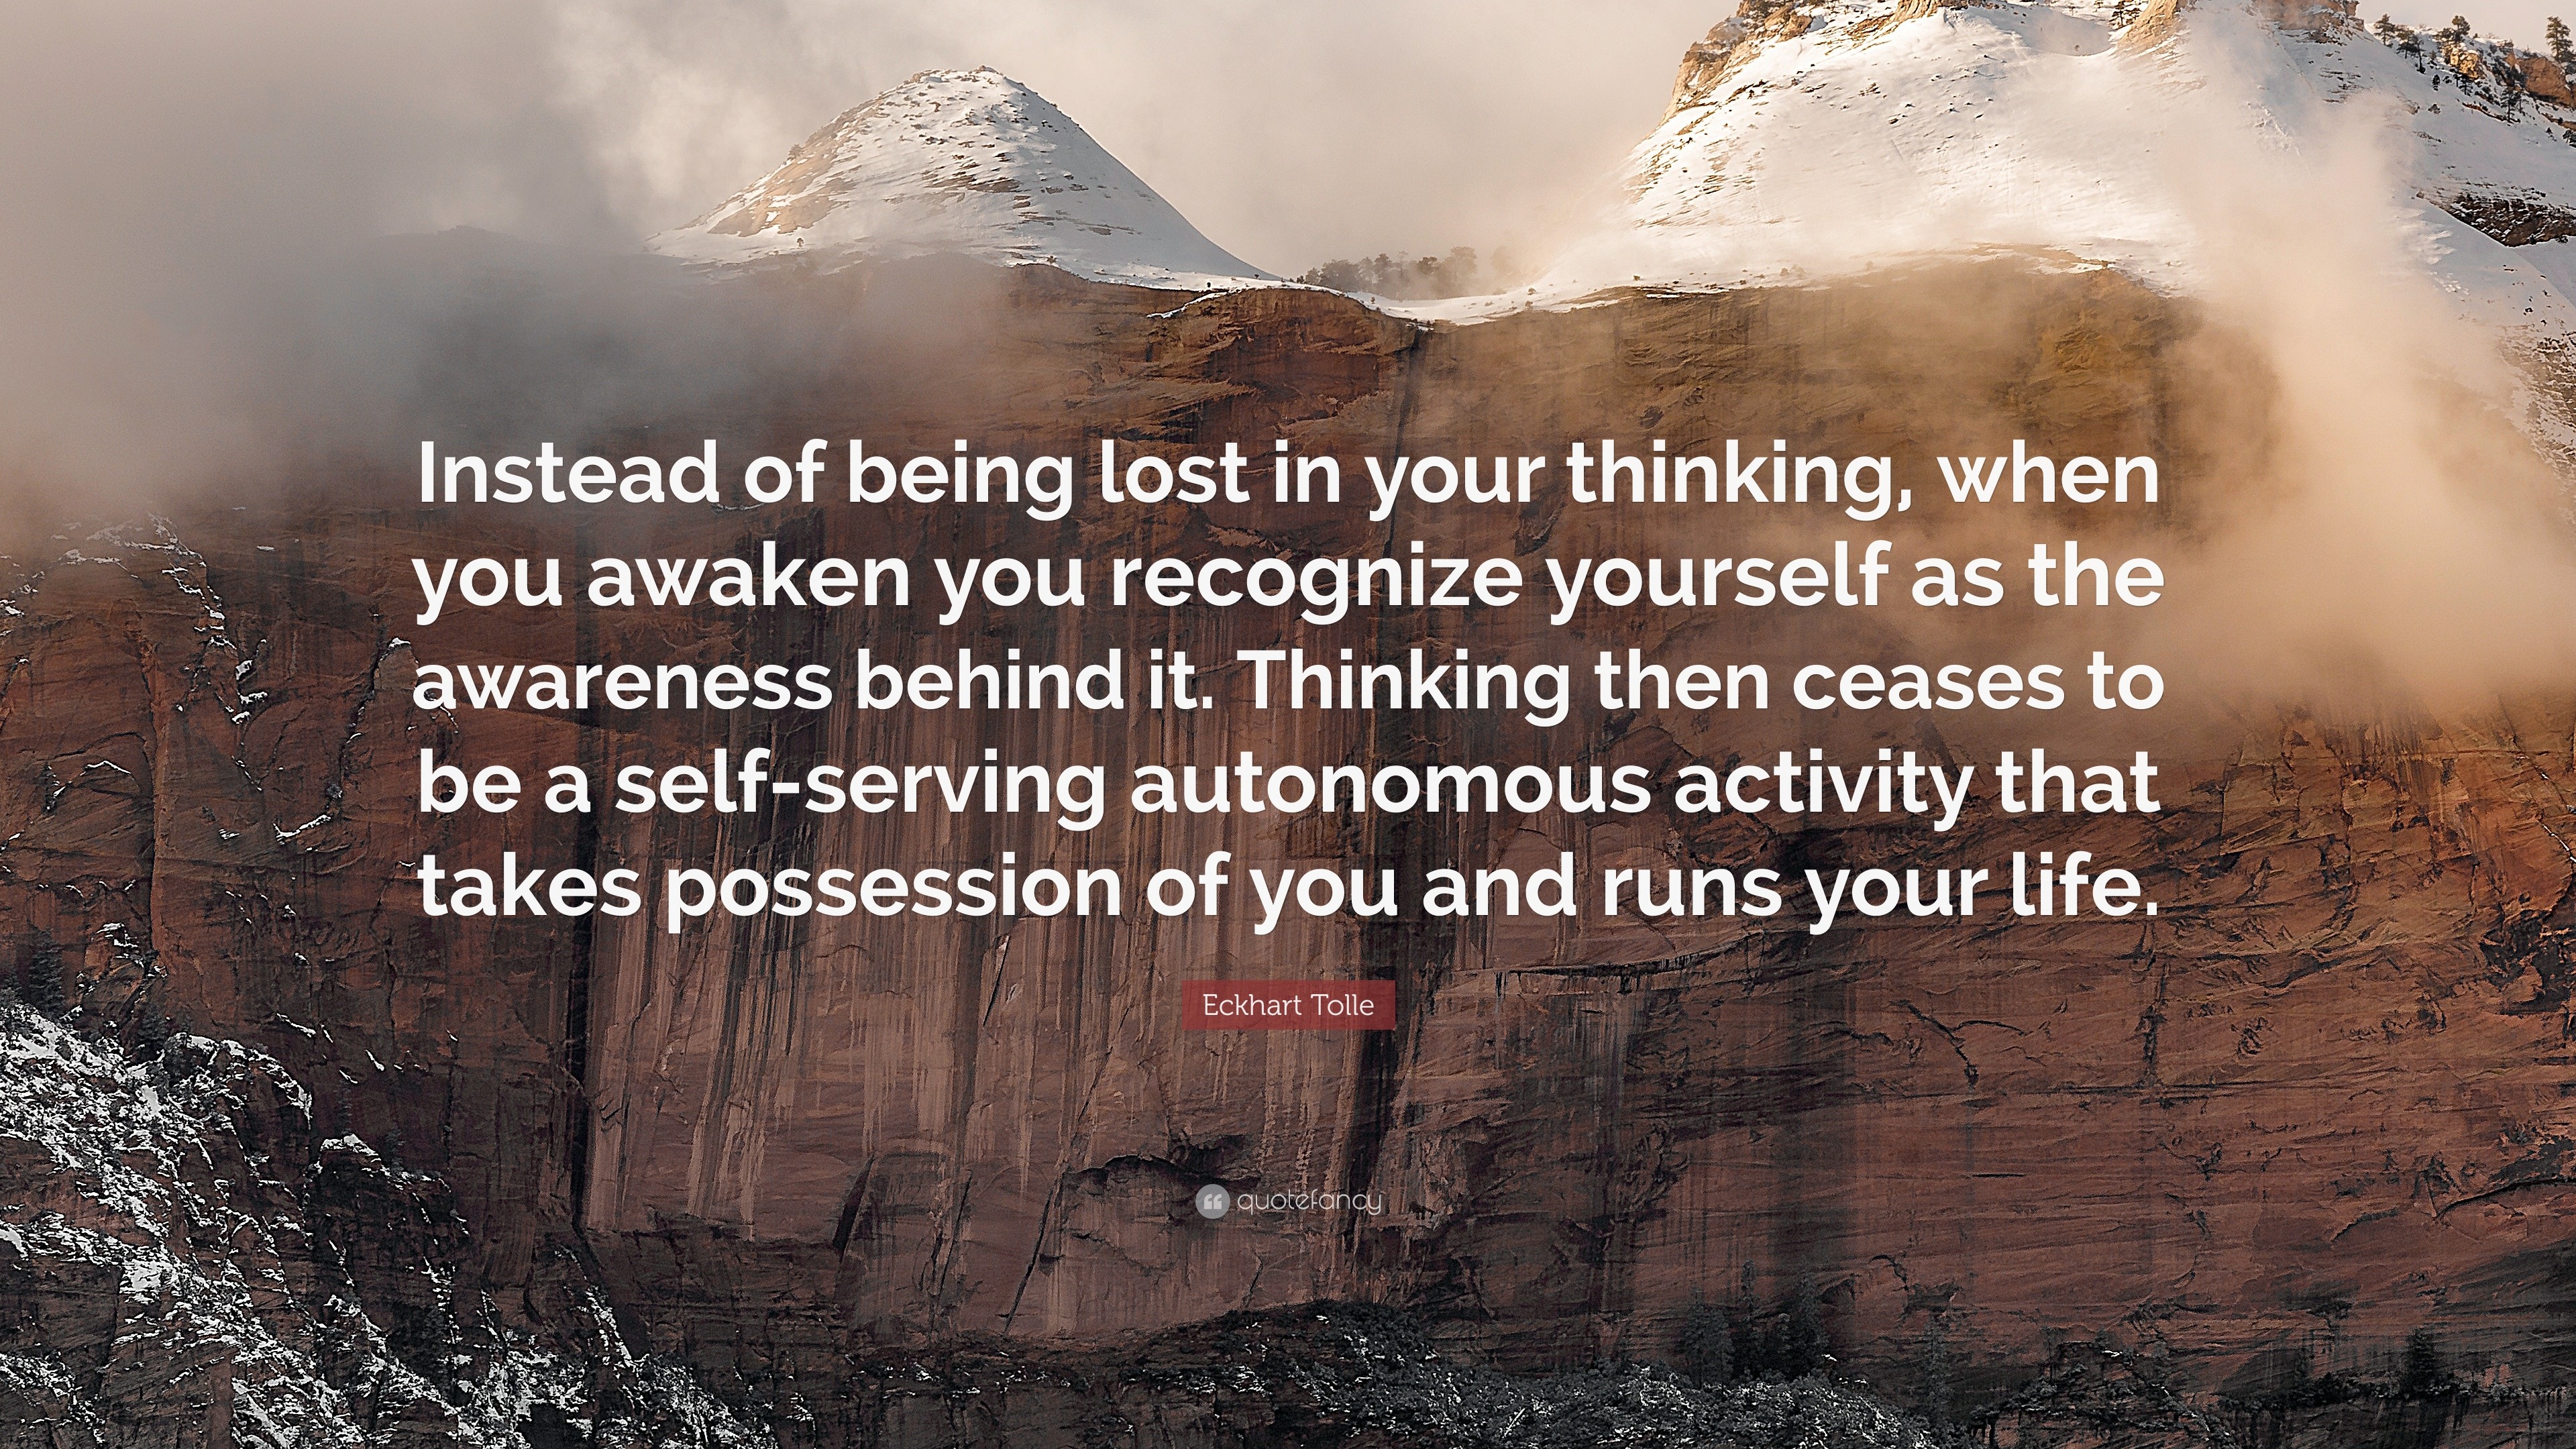 Eckhart Tolle Quote “Instead of being lost in your thinking when you awaken